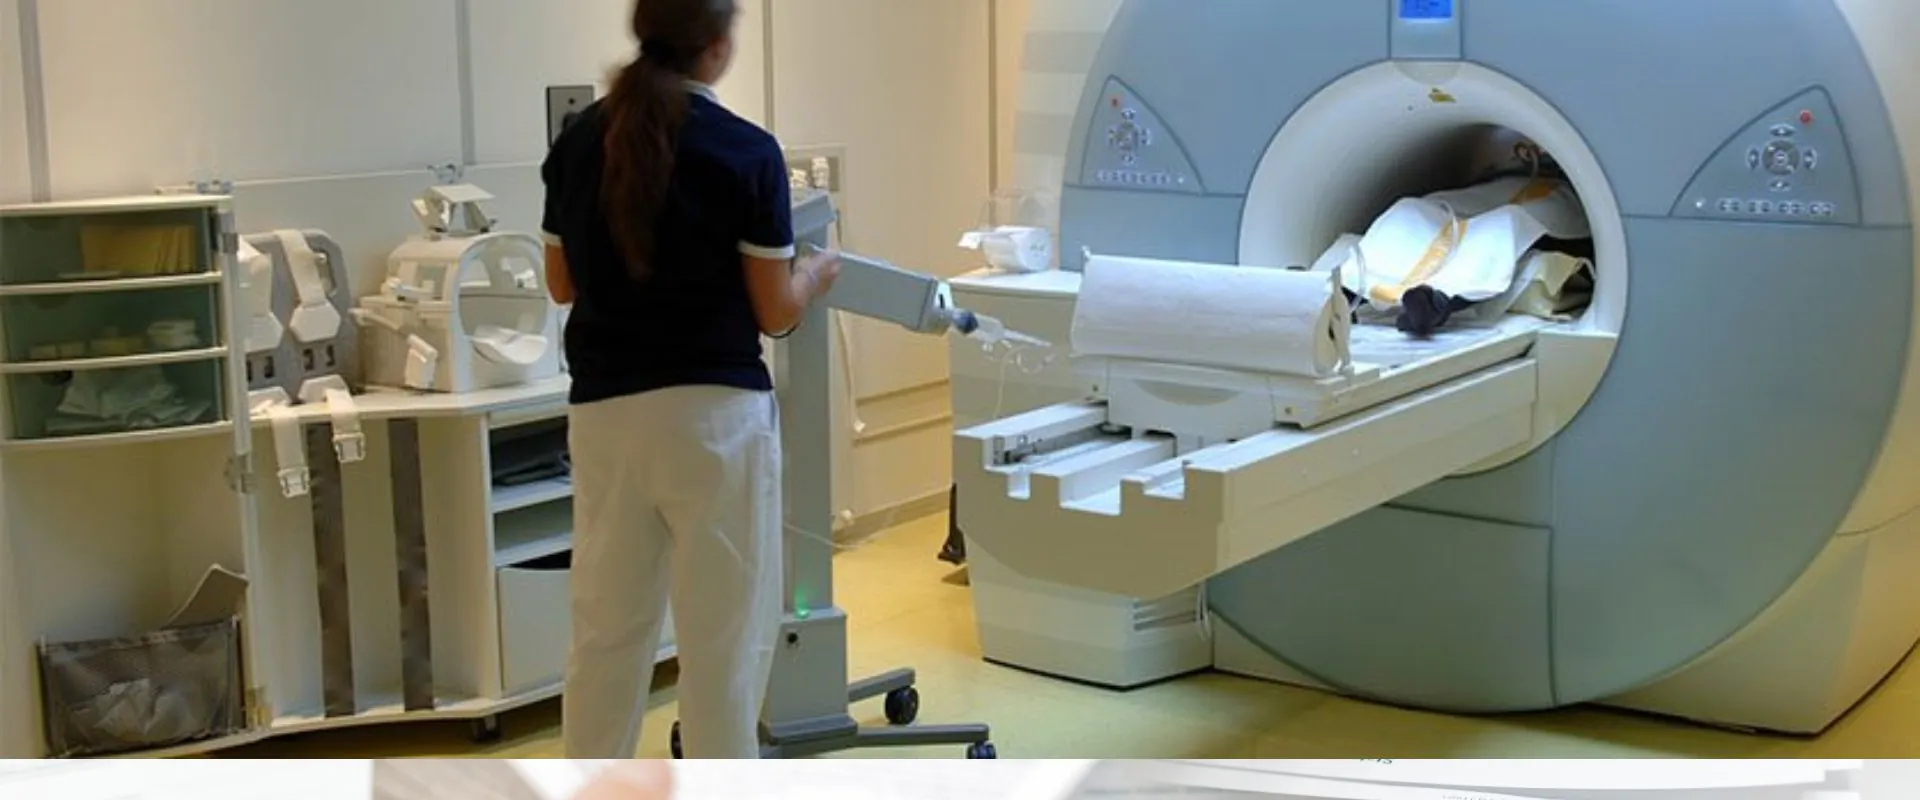 Market Segmentation Analysis for an MRI Manufacturer Helps Improve Competitiveness and Profitability